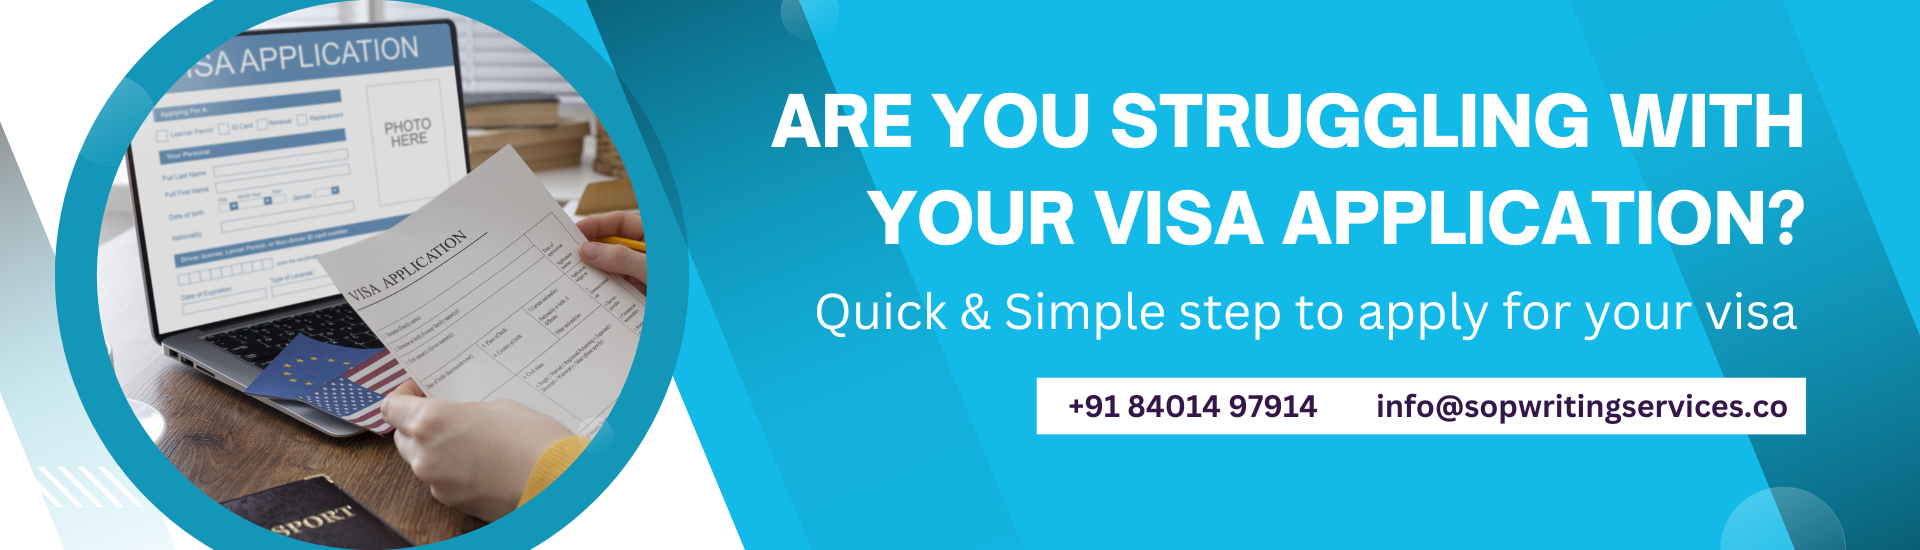 Are You Struggling With Your Visa Application